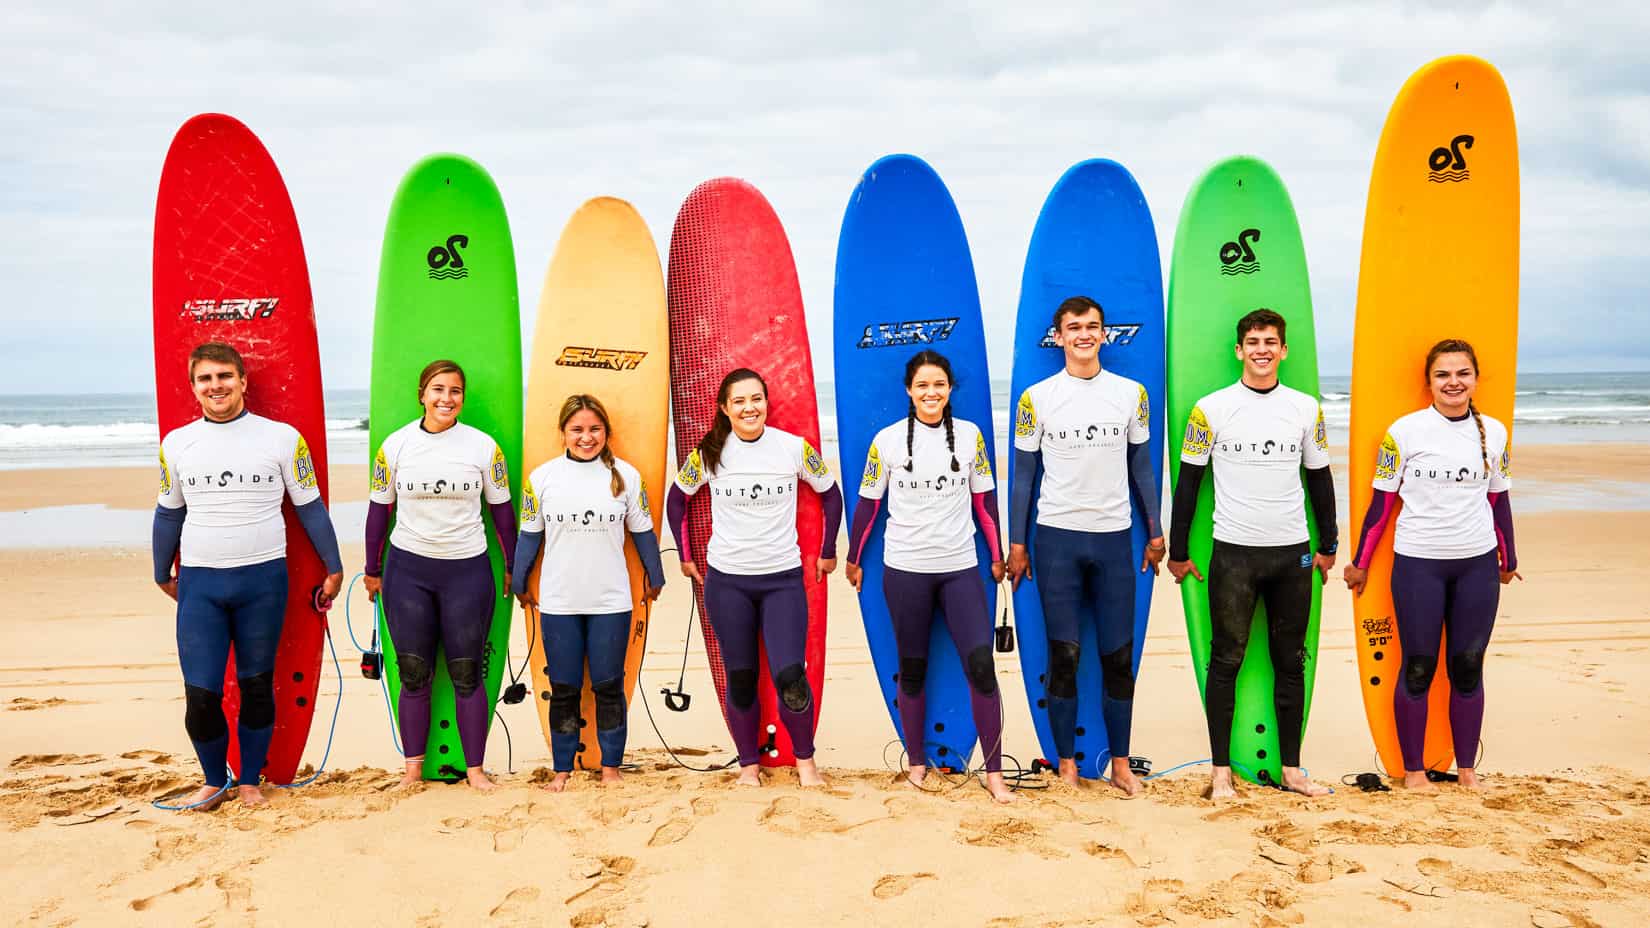 Students lined up with surfboards on the beach. (Lisbon, 2019)